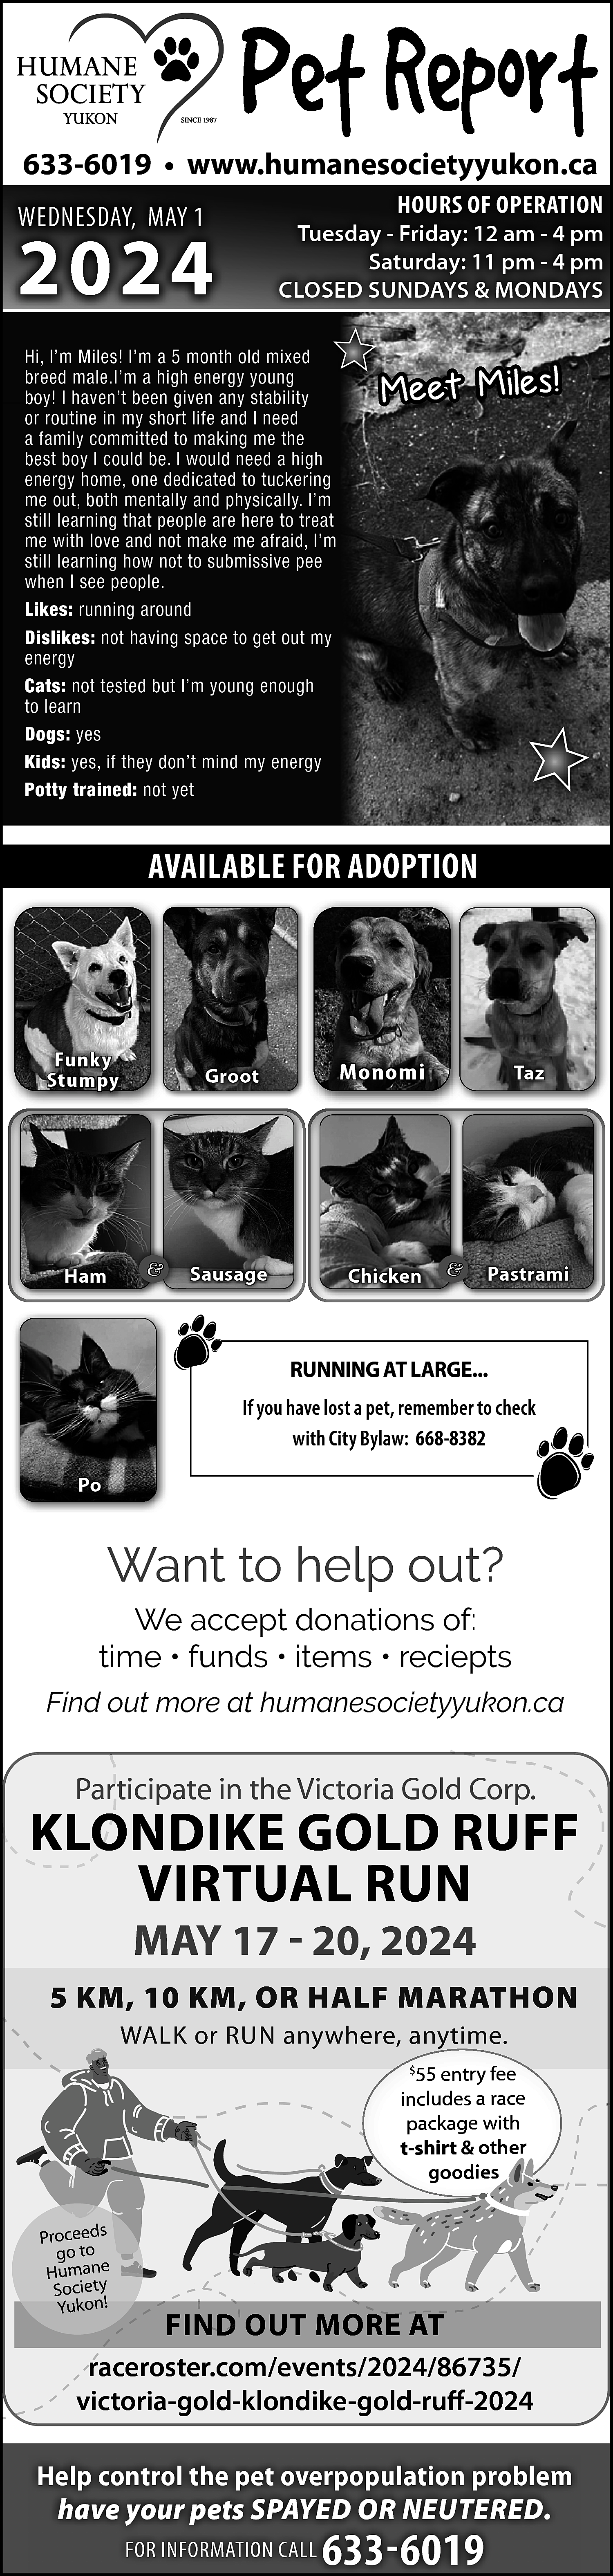 633-6019 • www.humanesocietyyukon.ca <br>HOURS OF  633-6019 • www.humanesocietyyukon.ca  HOURS OF OPERATION    WEDNESDAY, MAY 1    2024    Tuesday - Friday: 12 am - 4 pm  Saturday: 11 pm - 4 pm  CLOSED SUNDAYS & MONDAYS    Hi, I’m Miles! I’m a 5 month old mixed  breed male.I’m a high energy young  boy! I haven’t been given any stability  or routine in my short life and I need  a family committed to making me the  best boy I could be. I would need a high  energy home, one dedicated to tuckering  me out, both mentally and physically. I’m  still learning that people are here to treat  me with love and not make me afraid, I’m  still learning how not to submissive pee  when I see people.  Likes: running around  Dislikes: not having space to get out my  energy  Cats: not tested but I’m young enough  to learn  Dogs: yes  Kids: yes, if they don’t mind my energy  Potty trained: not yet    M ee t M ile s!    AVAILABLE FOR ADOPTION    Funky  Stumpy    Ham    &    Groot    Monomi    Sausage    Chicken    Taz    &    Pastrami    RUNNING AT LARGE...  If you have lost a pet, remember to check  with City Bylaw: 668-8382  Po    Want to help out?  We accept donations of:  time • funds • items • reciepts  Find out more at humanesocietyyukon.ca    Participate  ar  in the Victoria Gold Corp.    KLONDIKE  ONDIKE GOLD RUFF  VIRTUAL RUN  MAY 17 - 20, 2024    5 KM, 10 KM, OR HALF MARATHON  WALK or RUN anywhere, anytime.  $  55 entry fee  includes a race  package with  t-shirt & other  goodies    Proceeds  go to  Humane  Society  Yukon!    FIND OUT MORE AT    raceroster.com/events/2024/86735/  victoria-gold-klondike-gold-ruff-2024  Help control the pet overpopulation problem  have your pets SPAYED OR NEUTERED.  FOR INFORMATION CALL    633-6019    